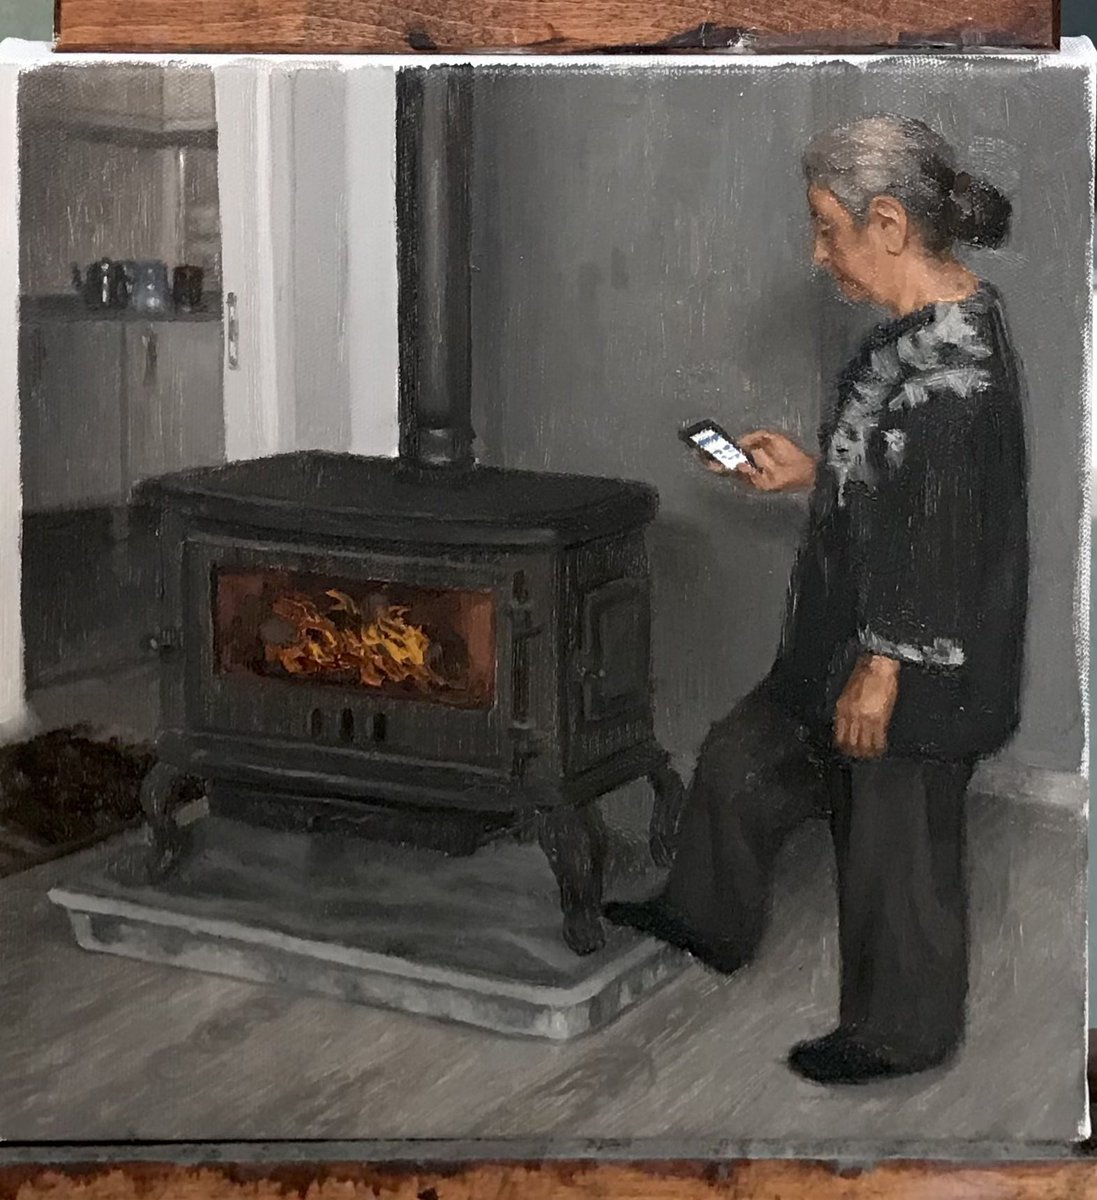 Mom checking her phone
Oil 2023

#art #artist #oil #oiloncanvasboard #painting #fromlife #home #house #interior #painter #draft #craft #life